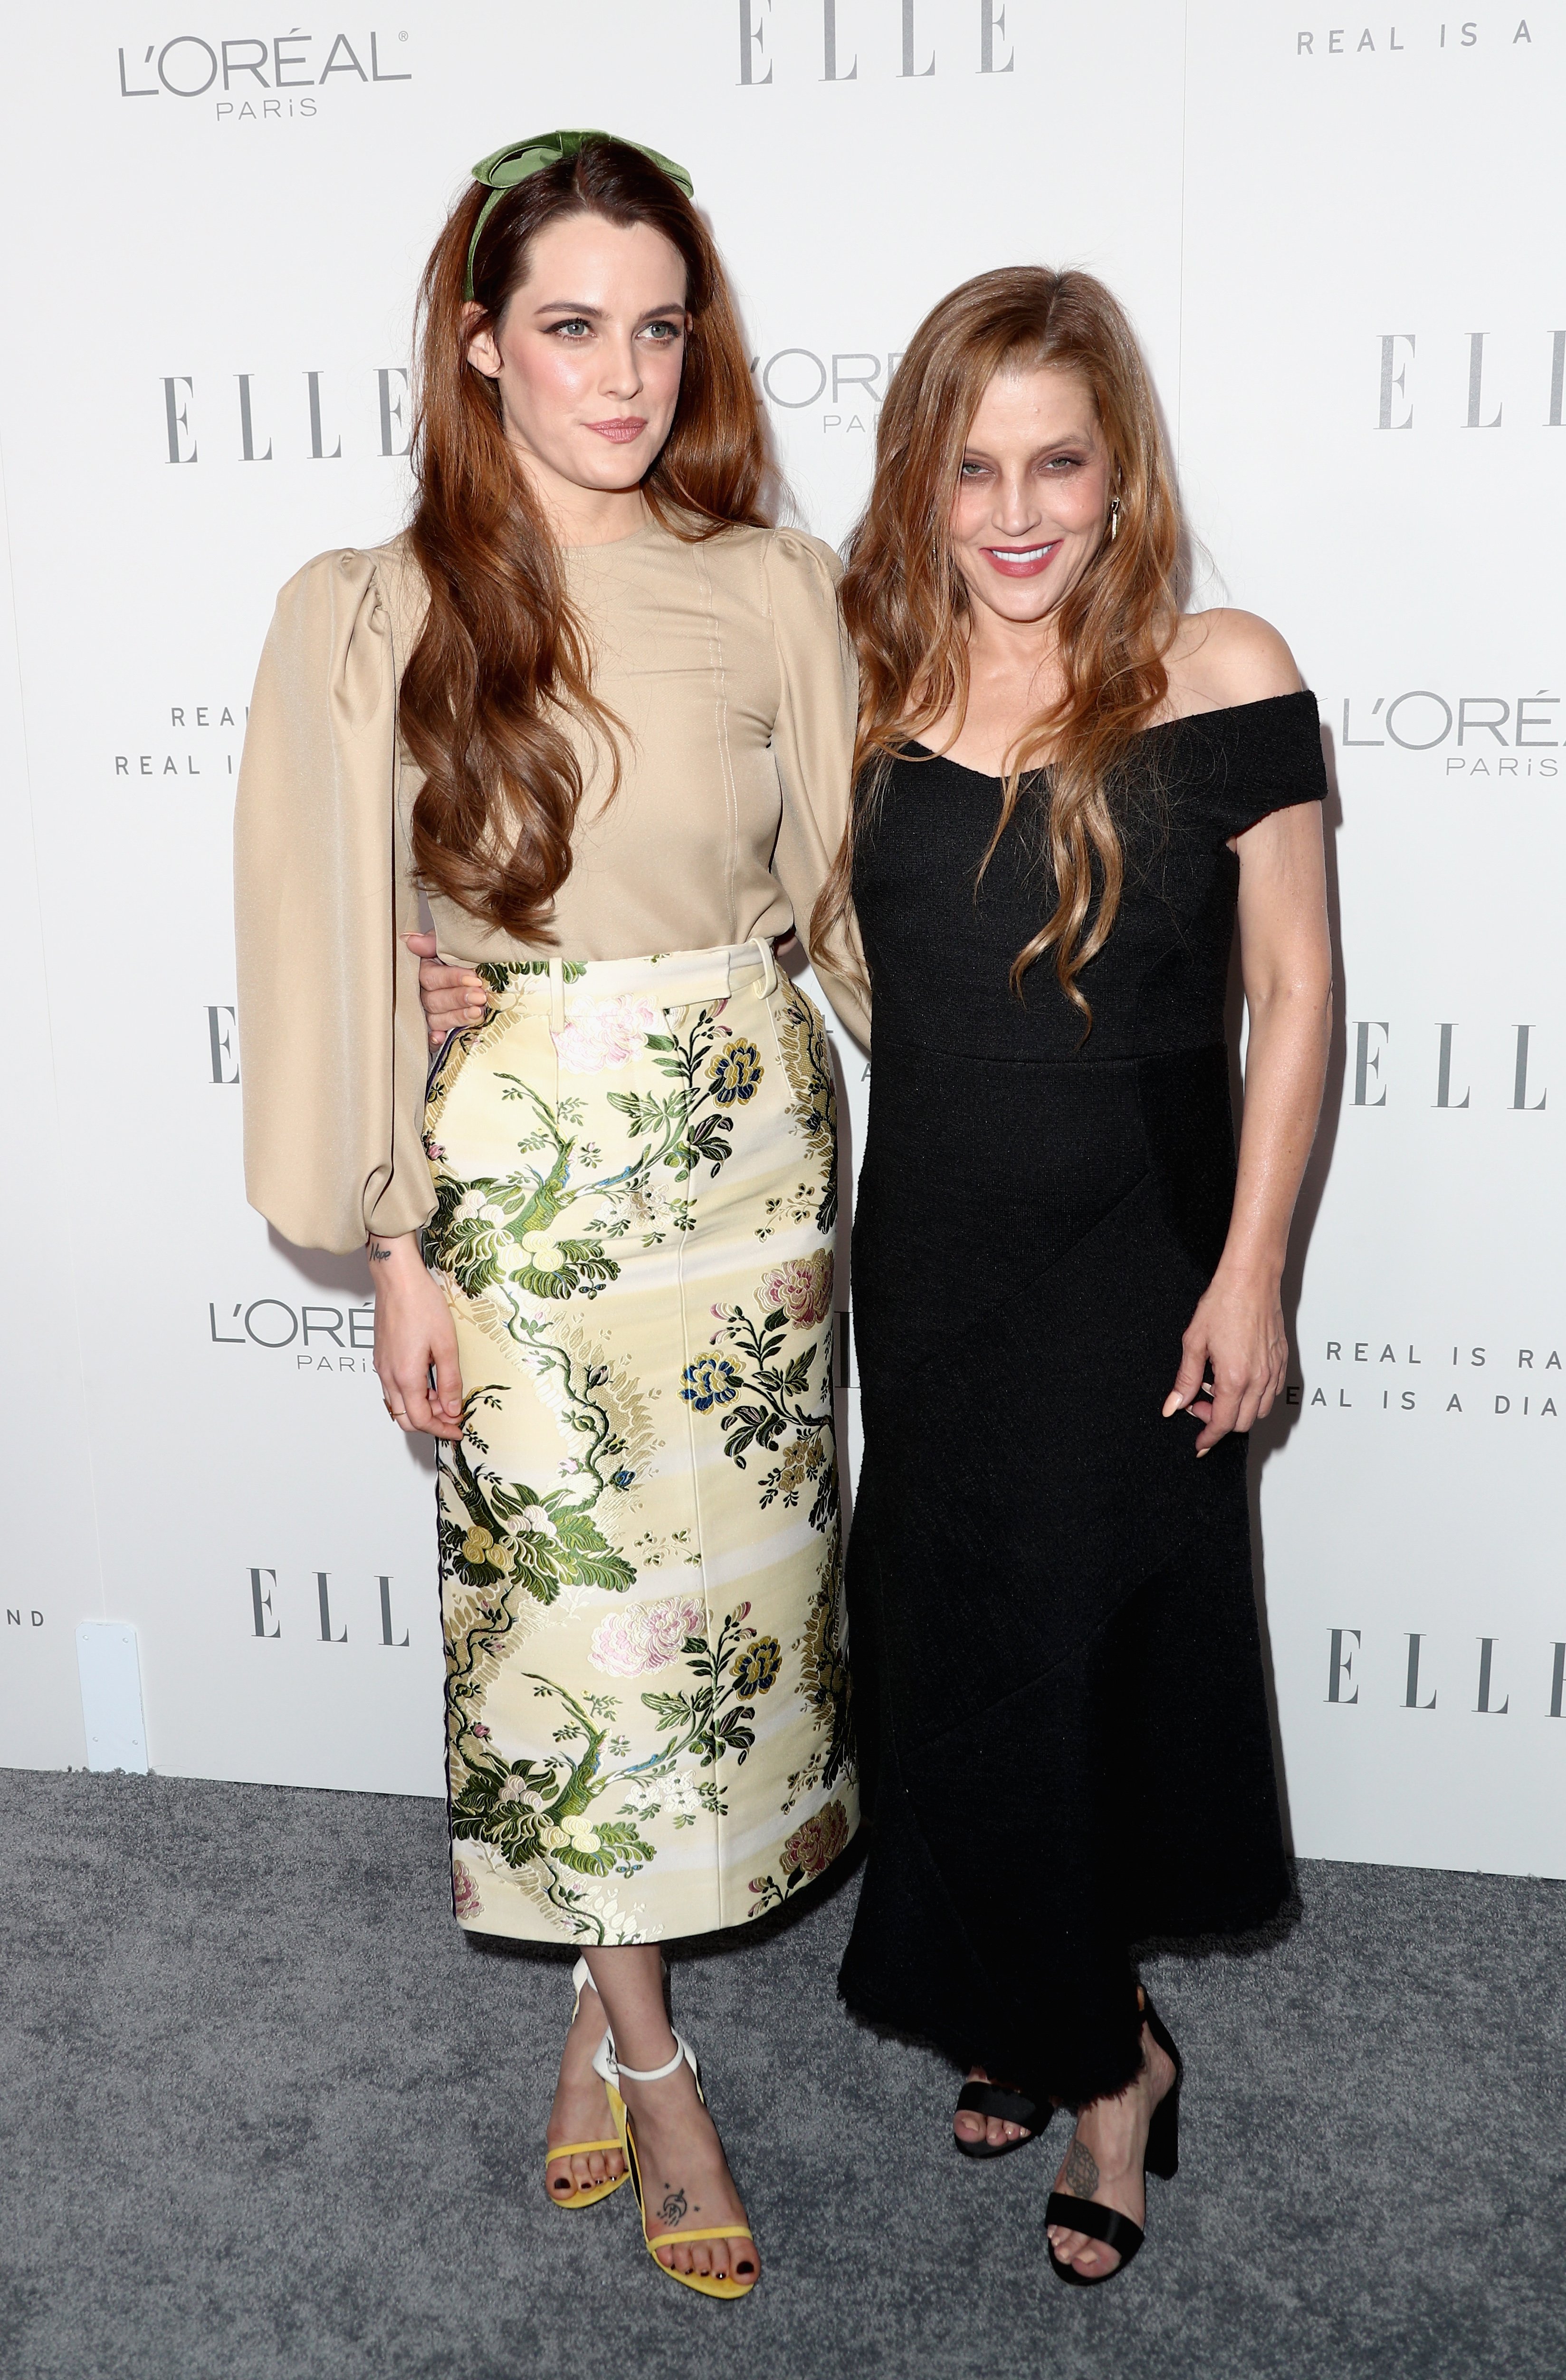 Riley Keough and her mother Lisa Marie Presley. | Photo: Getty Images